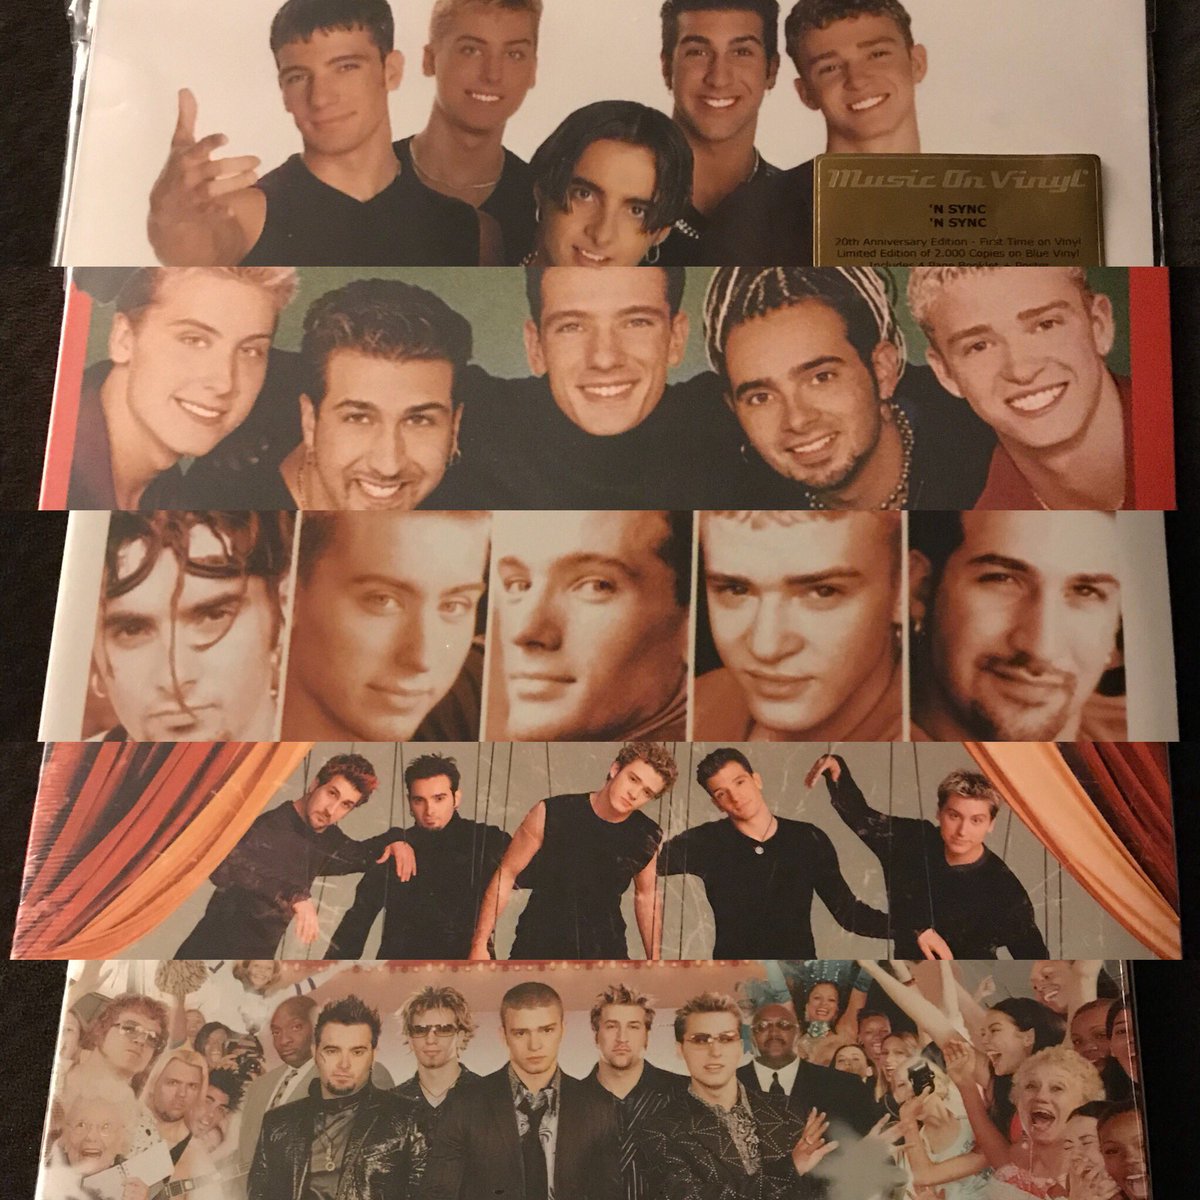 The happiest fan in all the land! The last of my vinyls arrived today...collection complete ✔️

#myboys #vinyl #nsync #nsyncforever #firsttimeonvinyl